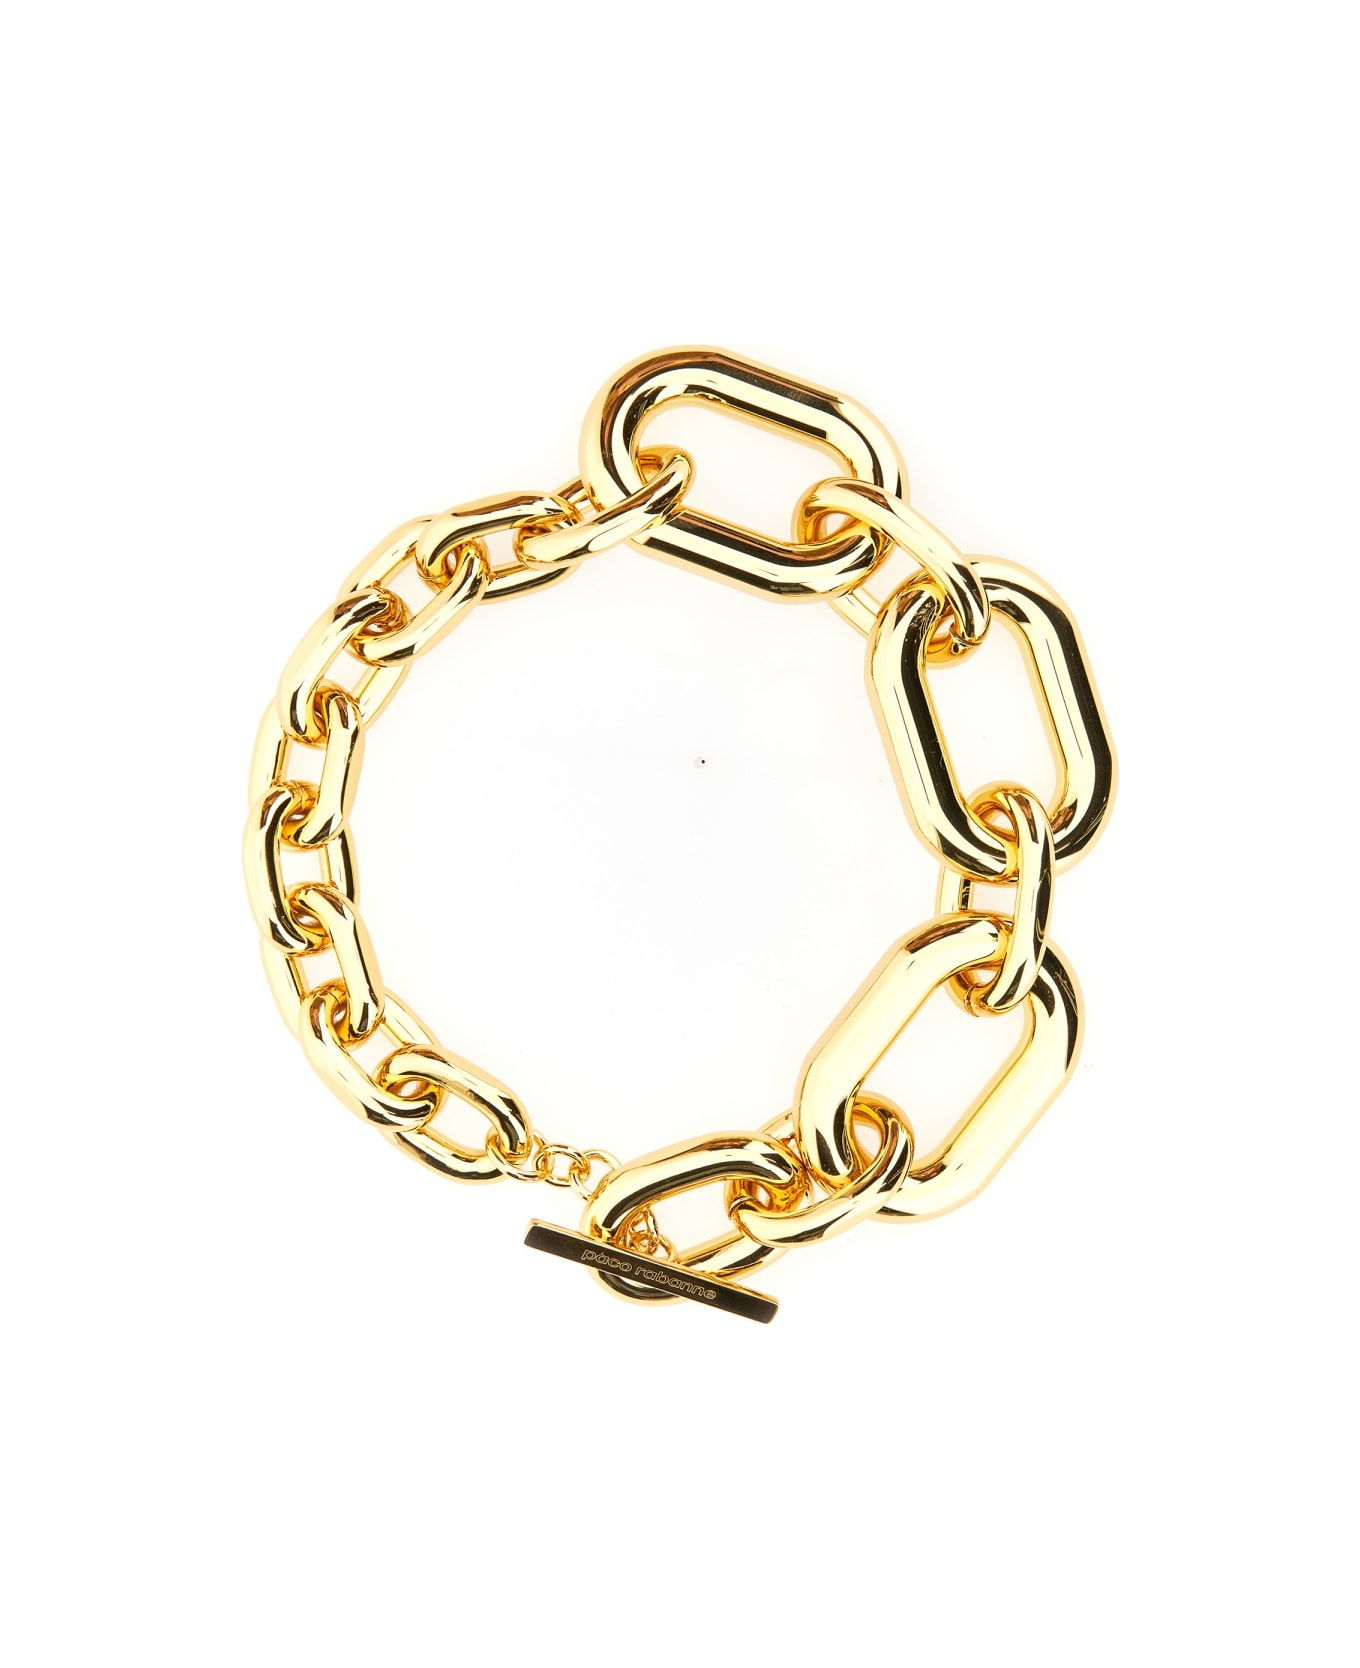 Paco Rabanne 'xl Link' Necklace - GOLD